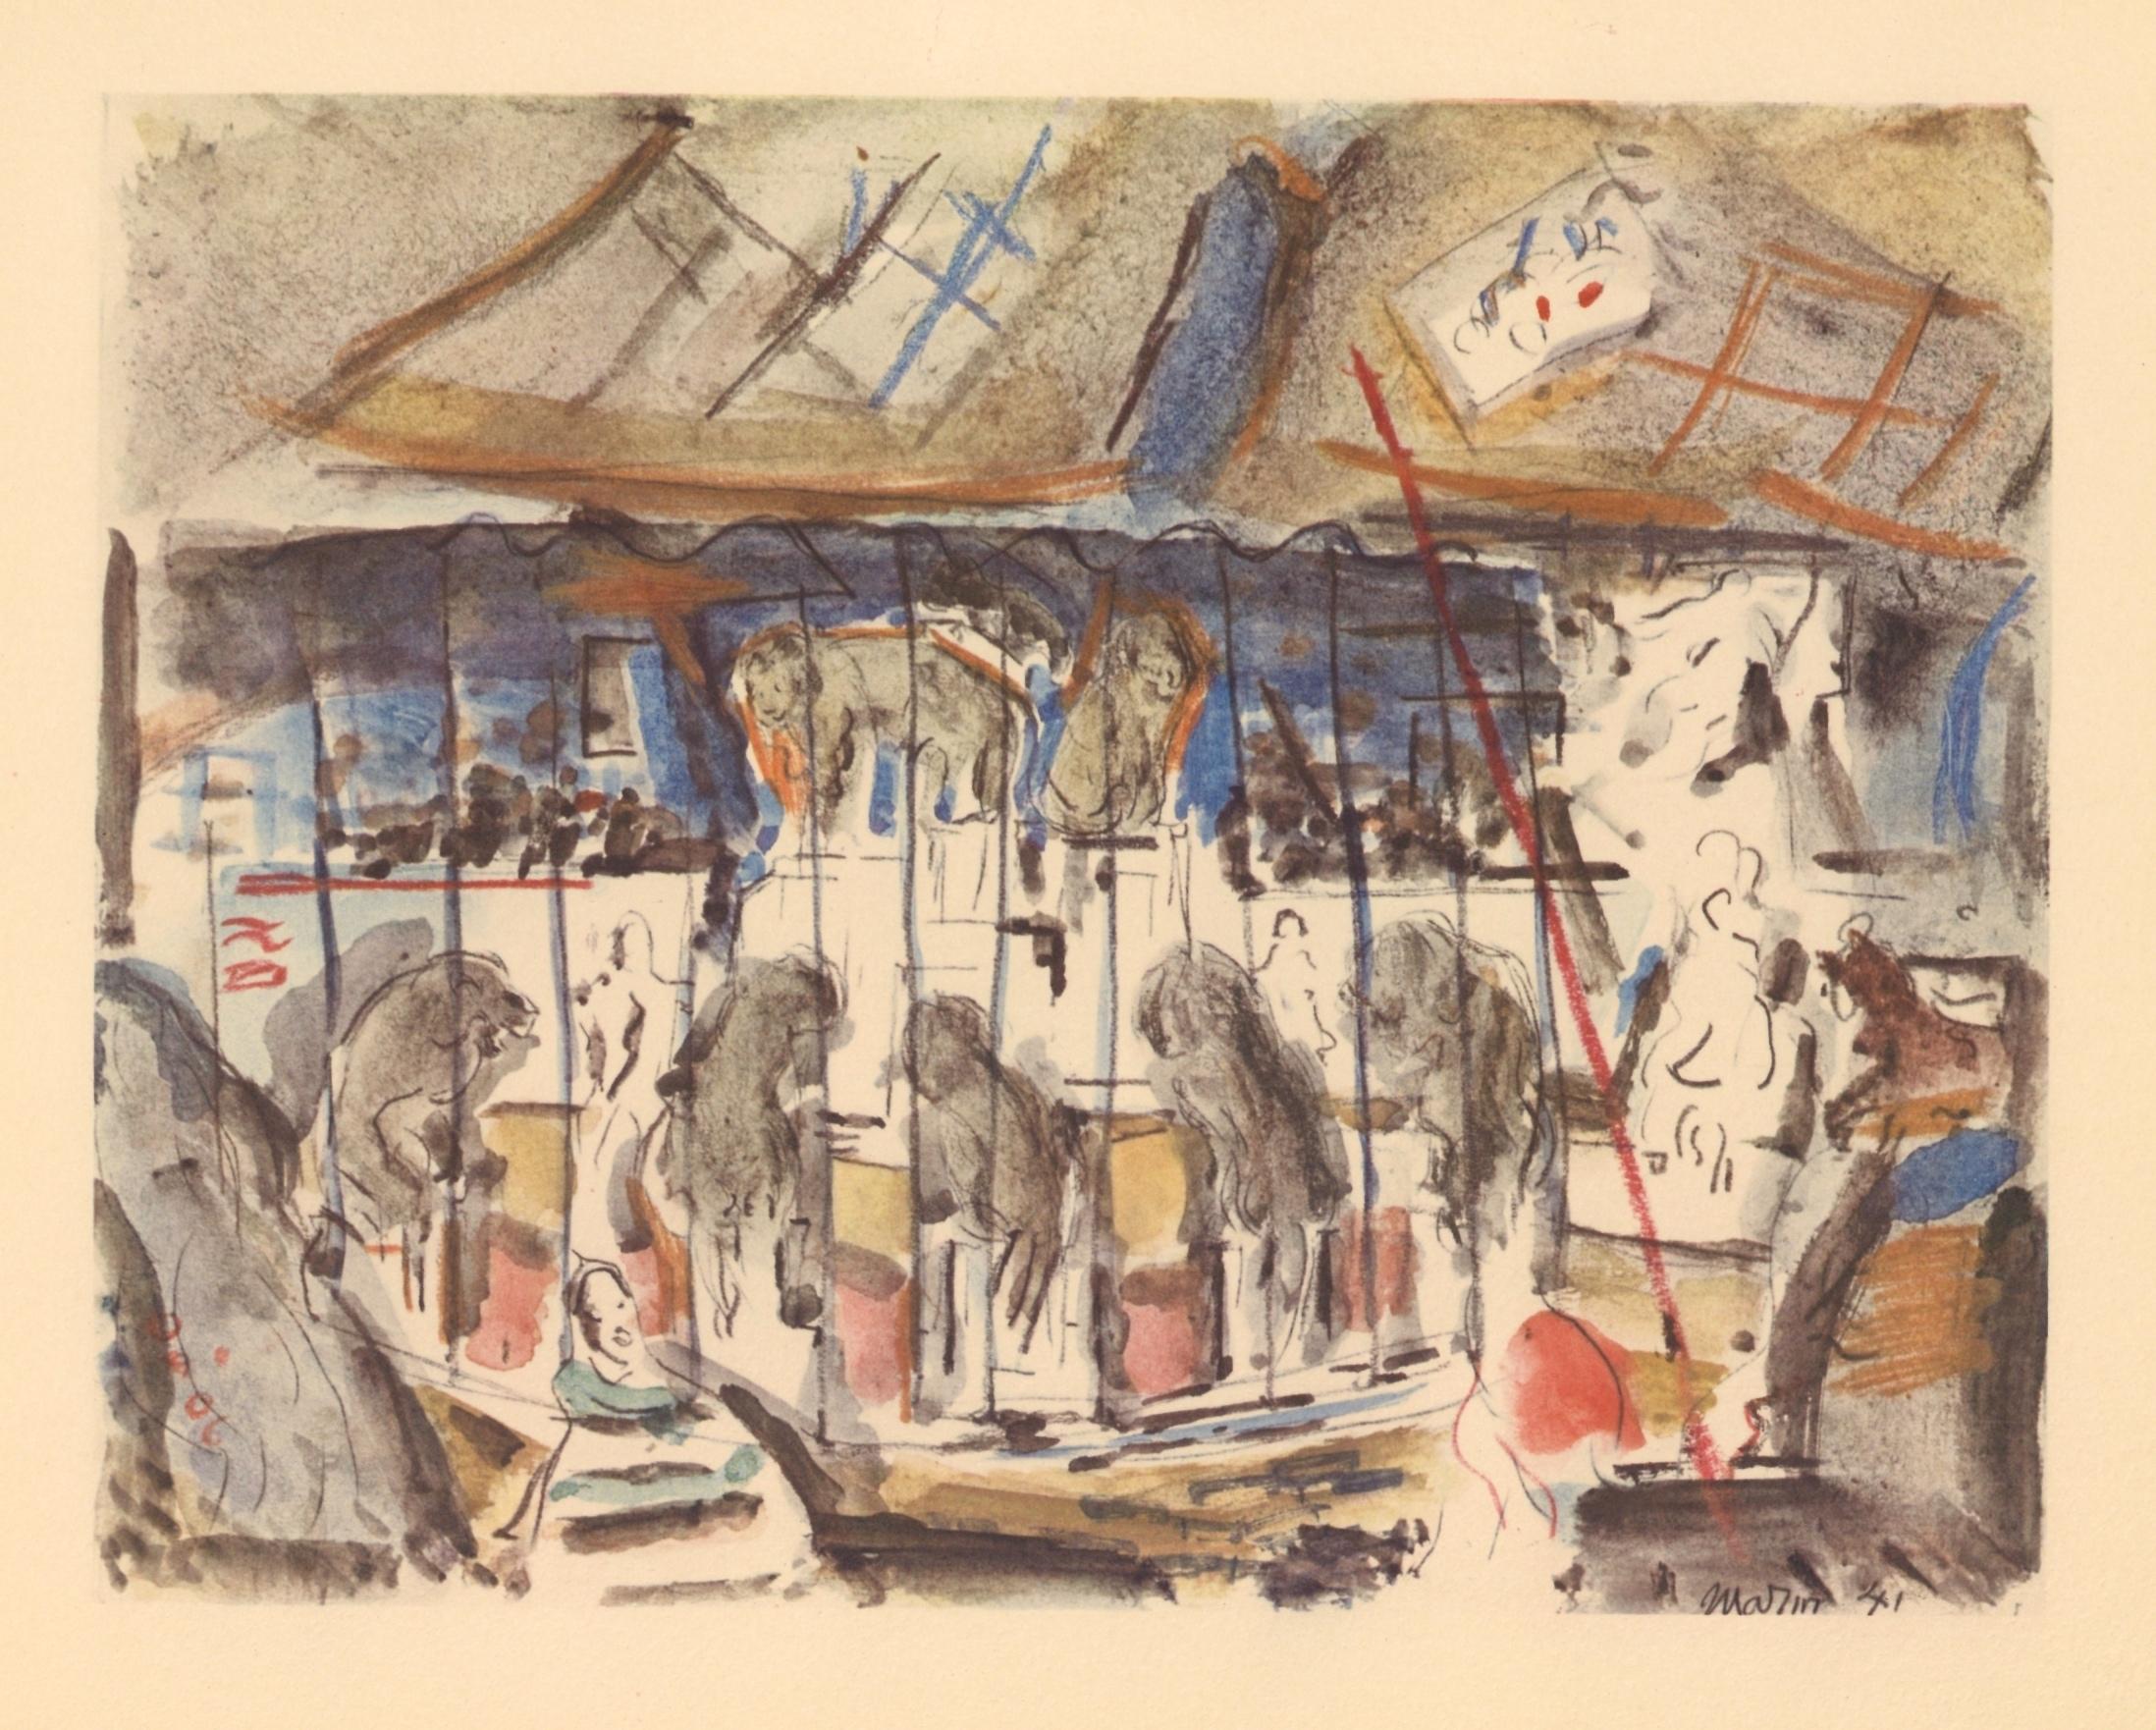 Medium: lithograph (after the watercolor). Issued in 1950 in a limited edition of 125. The image size is 7 3/4 x 10 inches; the full sheet measures 10 x 12 1/2 inches (253 x 317 mm). Signed in the plate, not by hand.